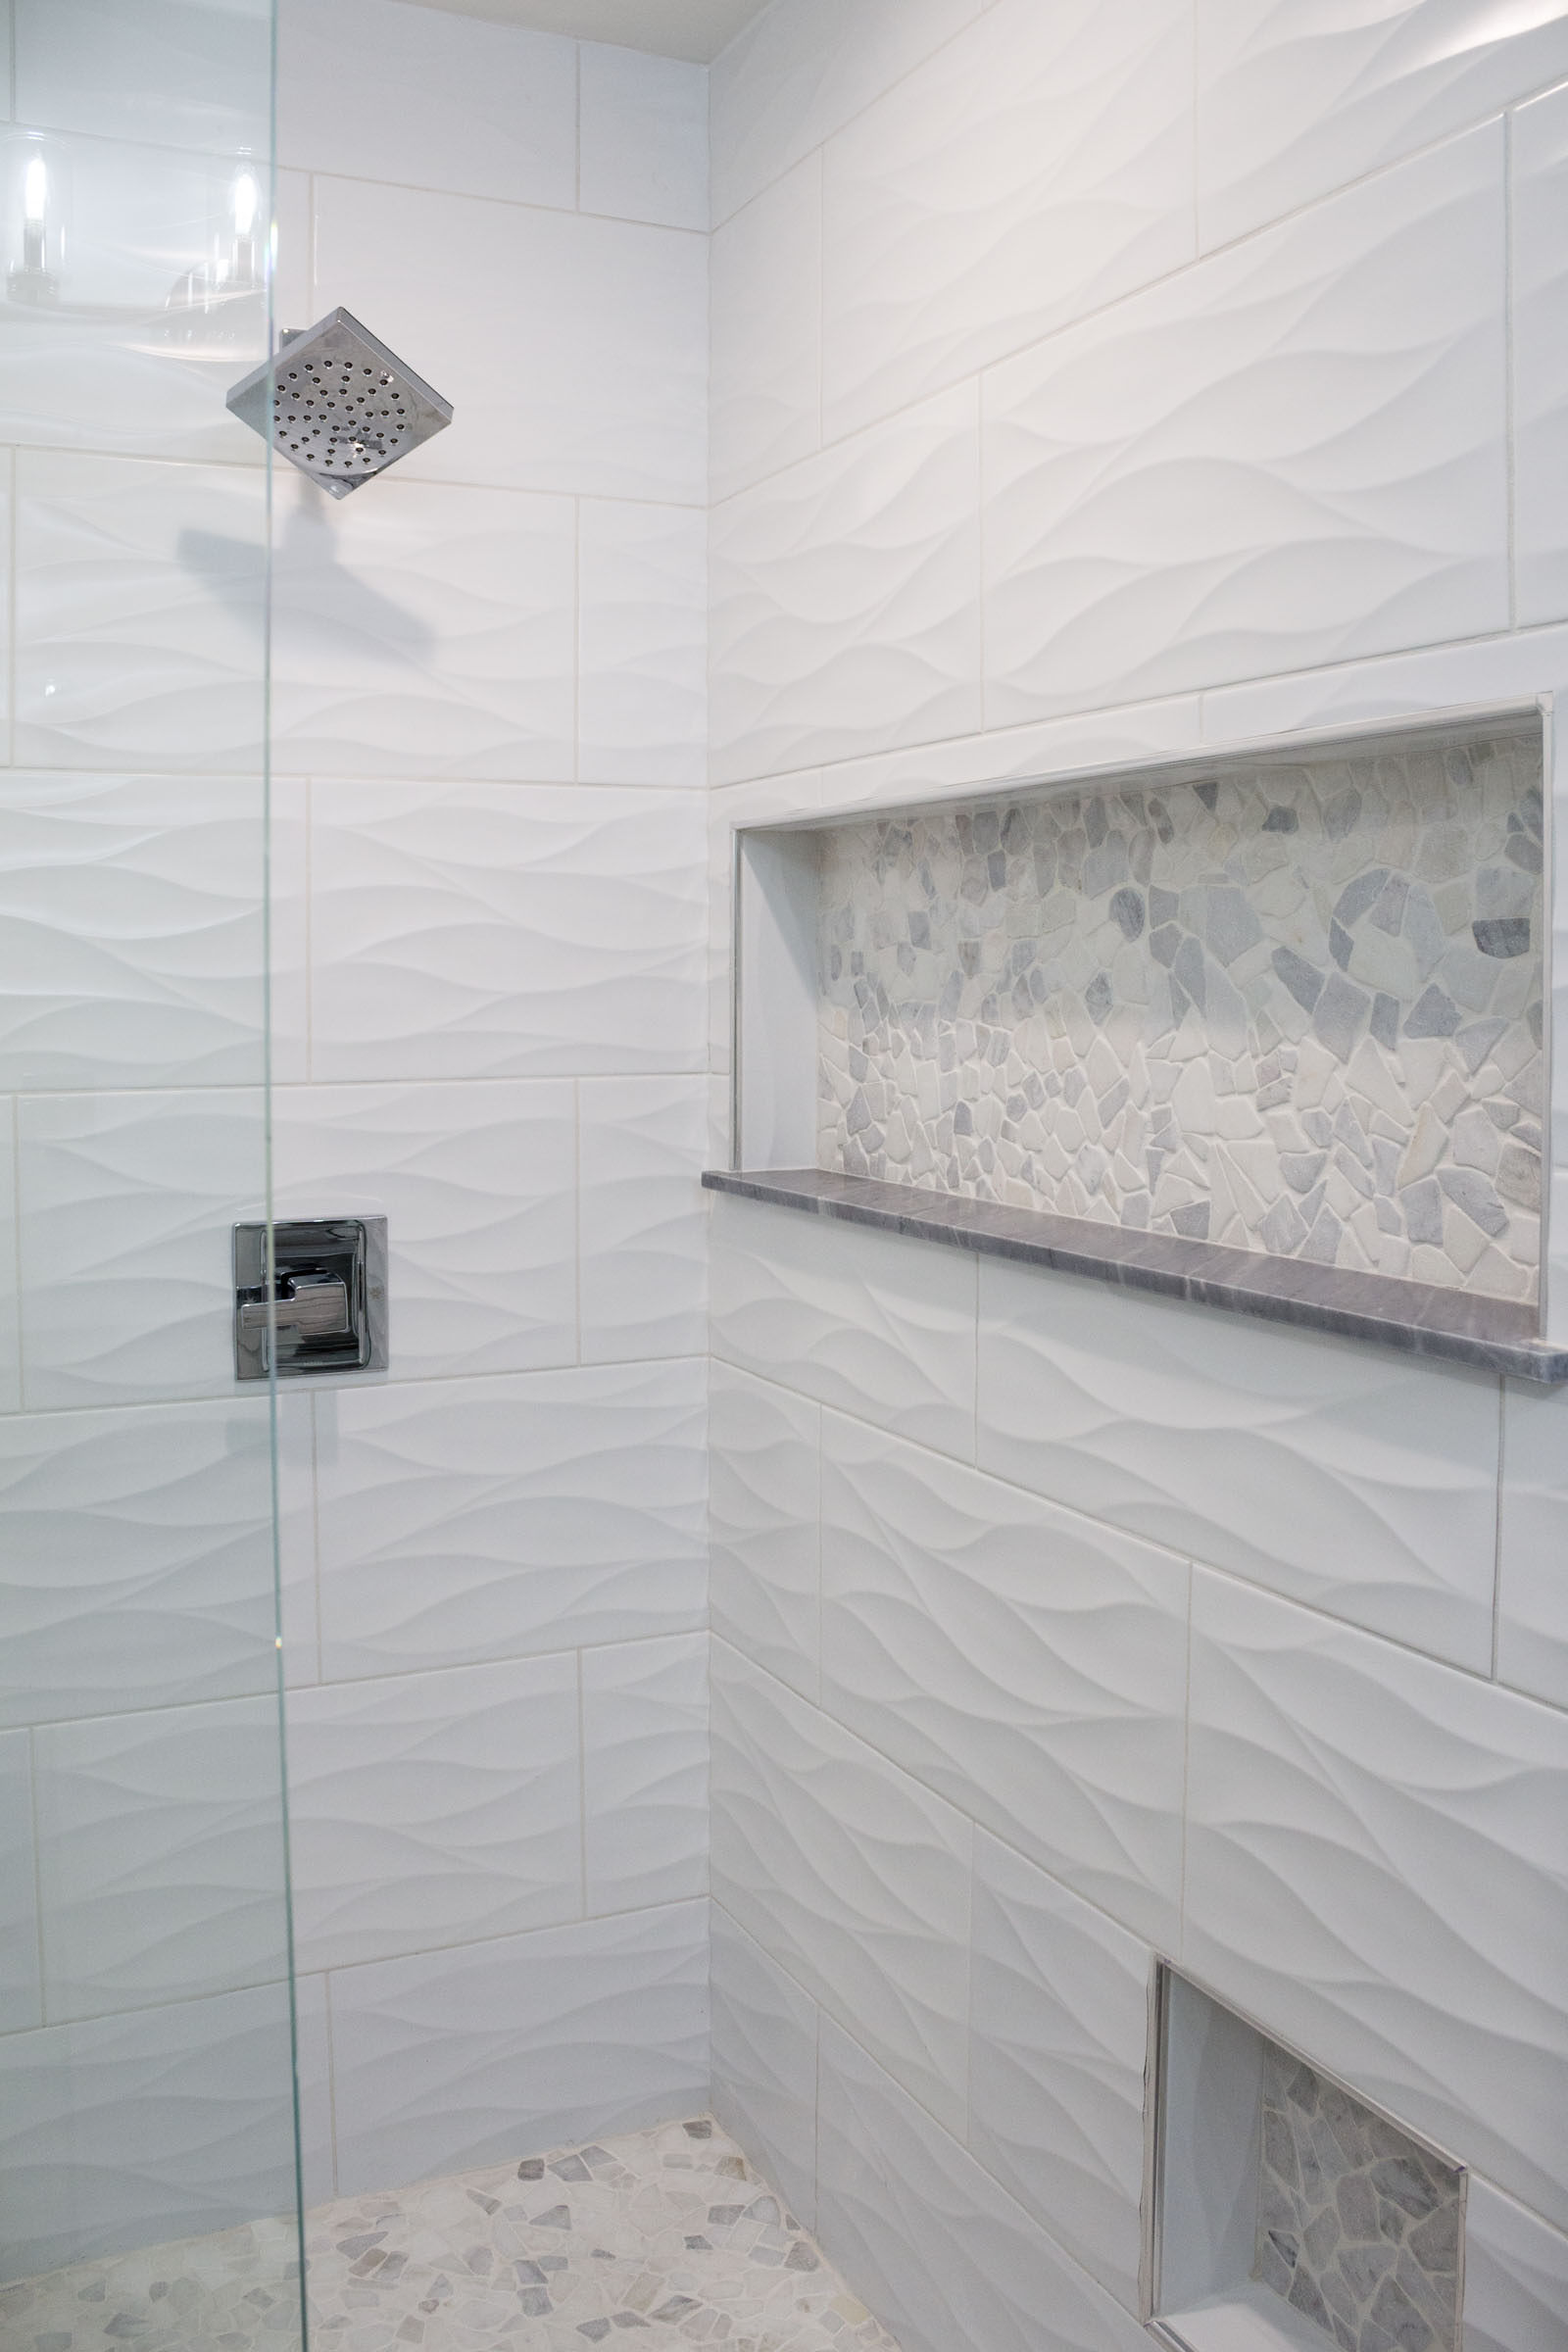 Walk in shower remodel with white tile and niche inserts